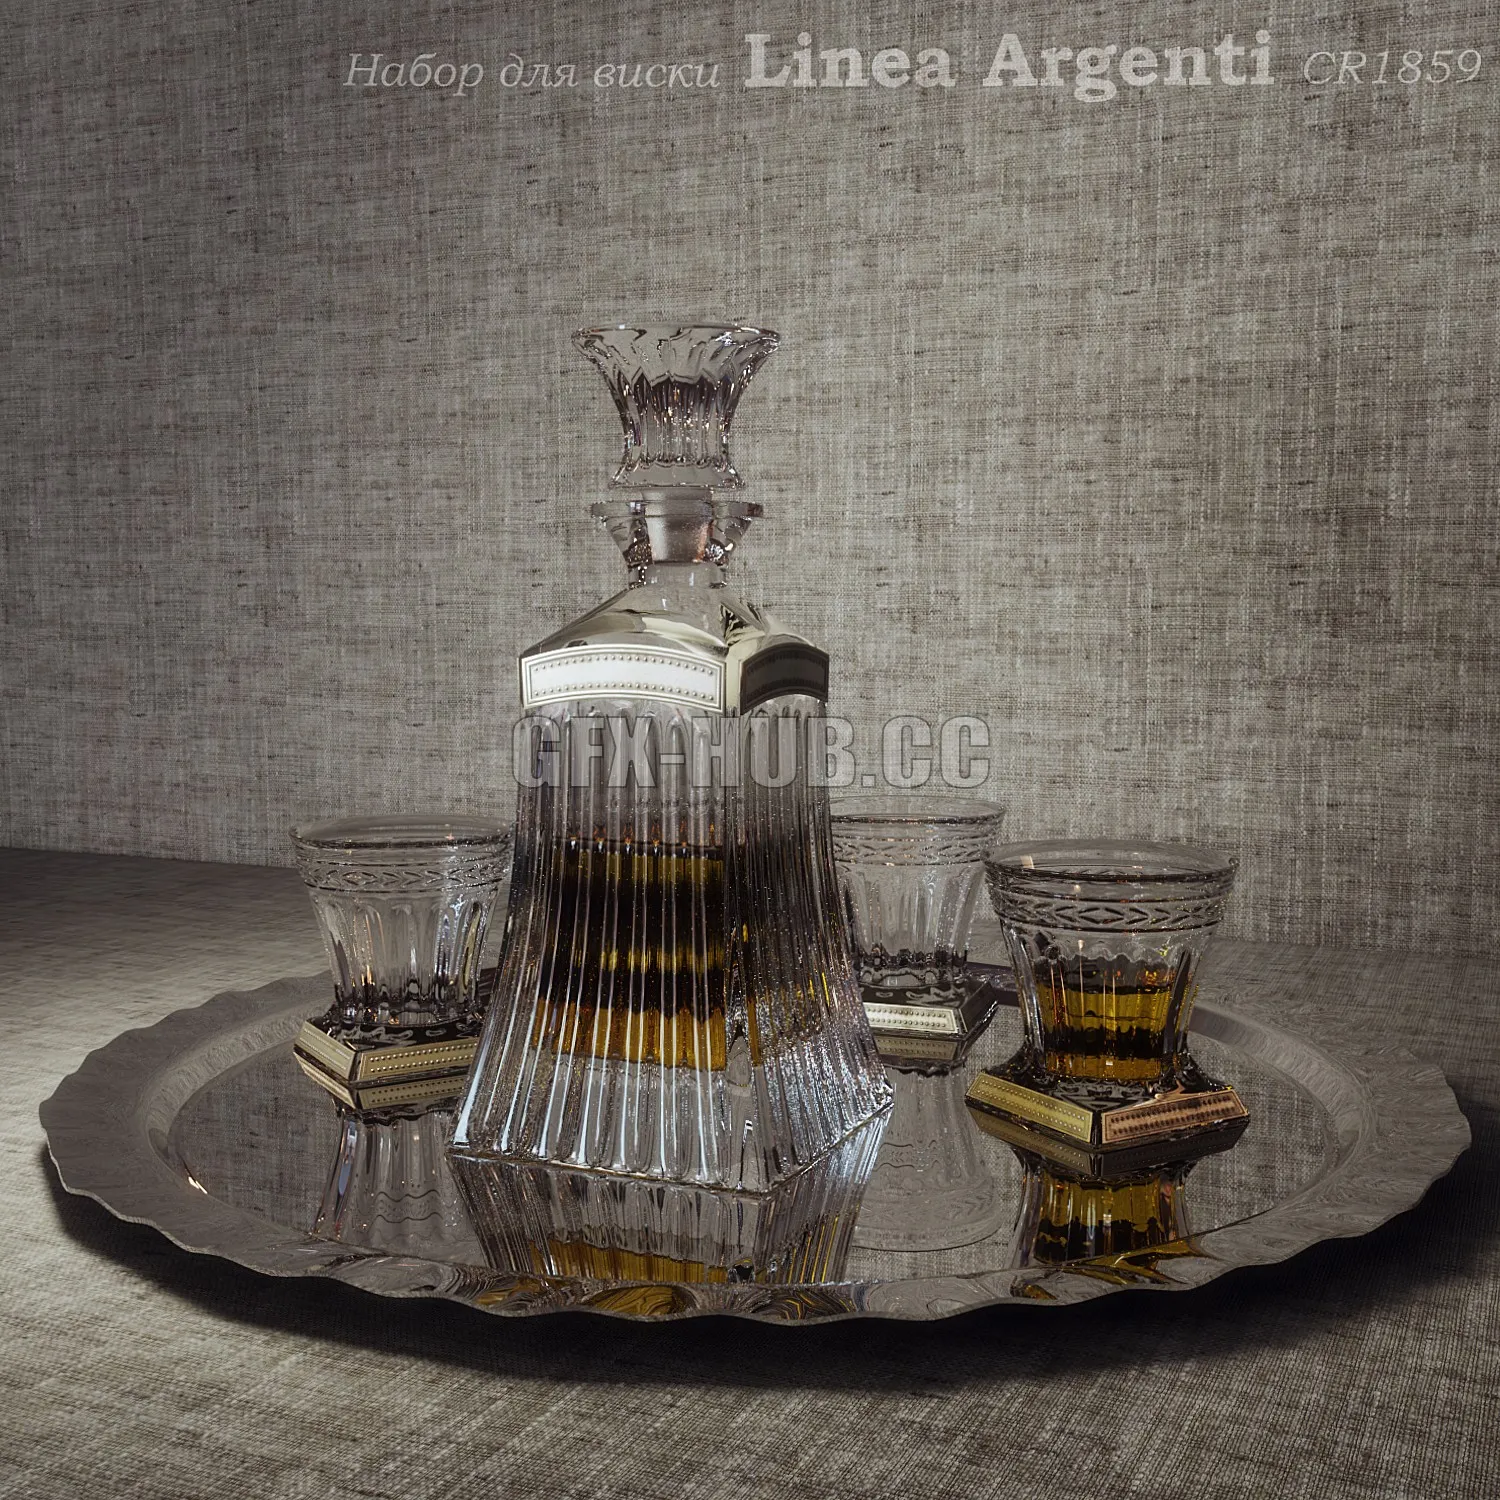 Set for whiskey Linea Argenti CR1859 – 224771